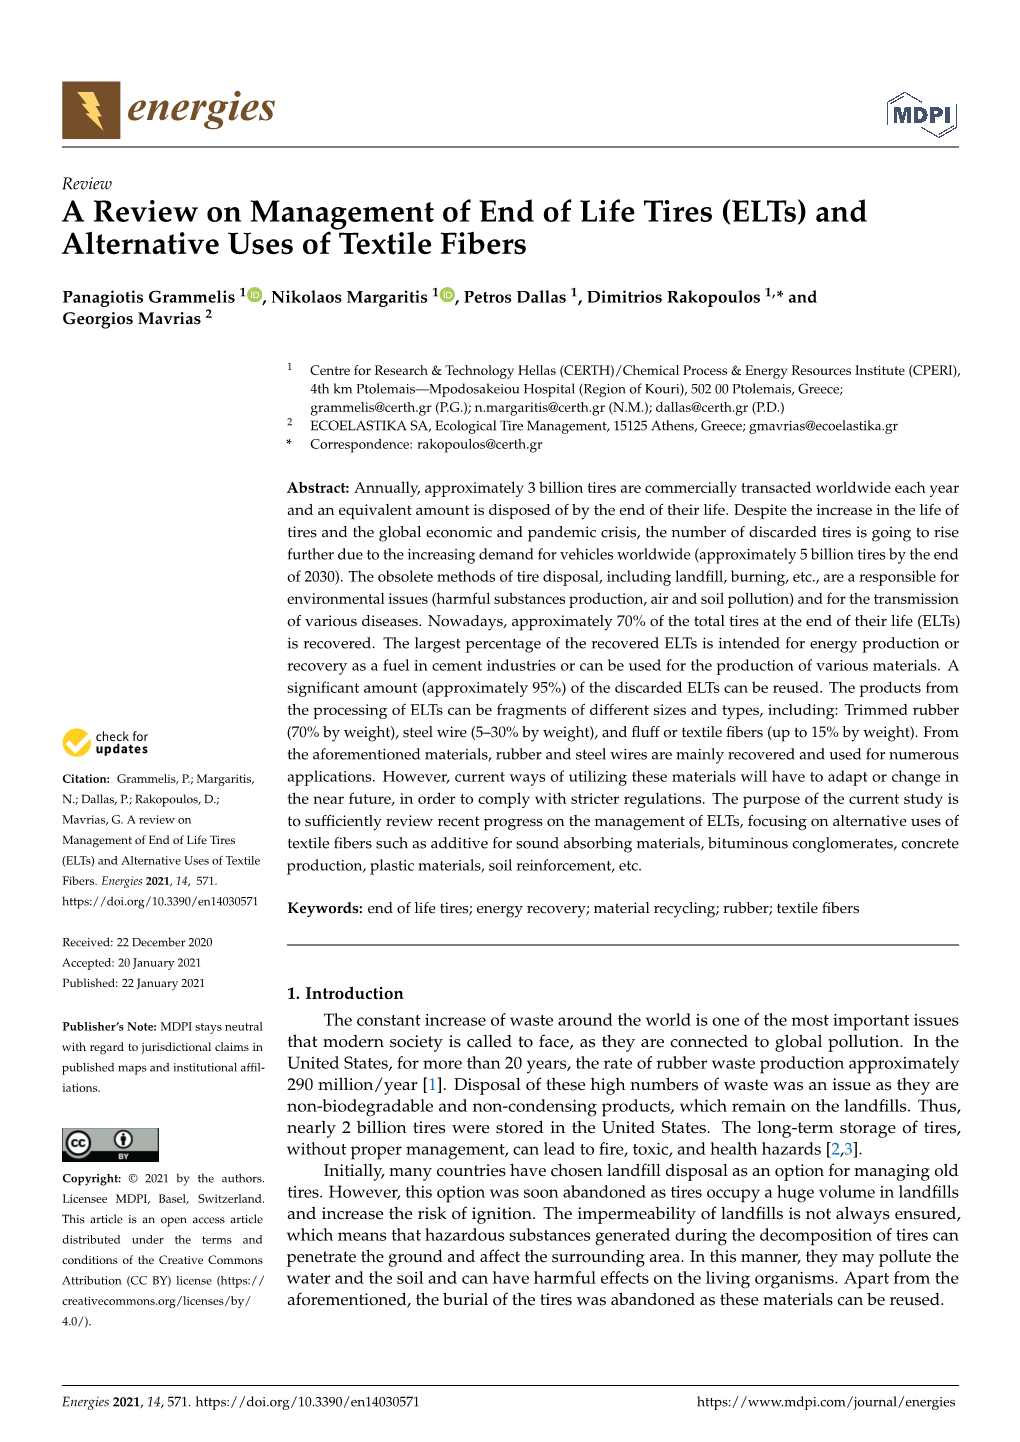 A Review on Management of End of Life Tires (Elts) and Alternative Uses of Textile Fibers